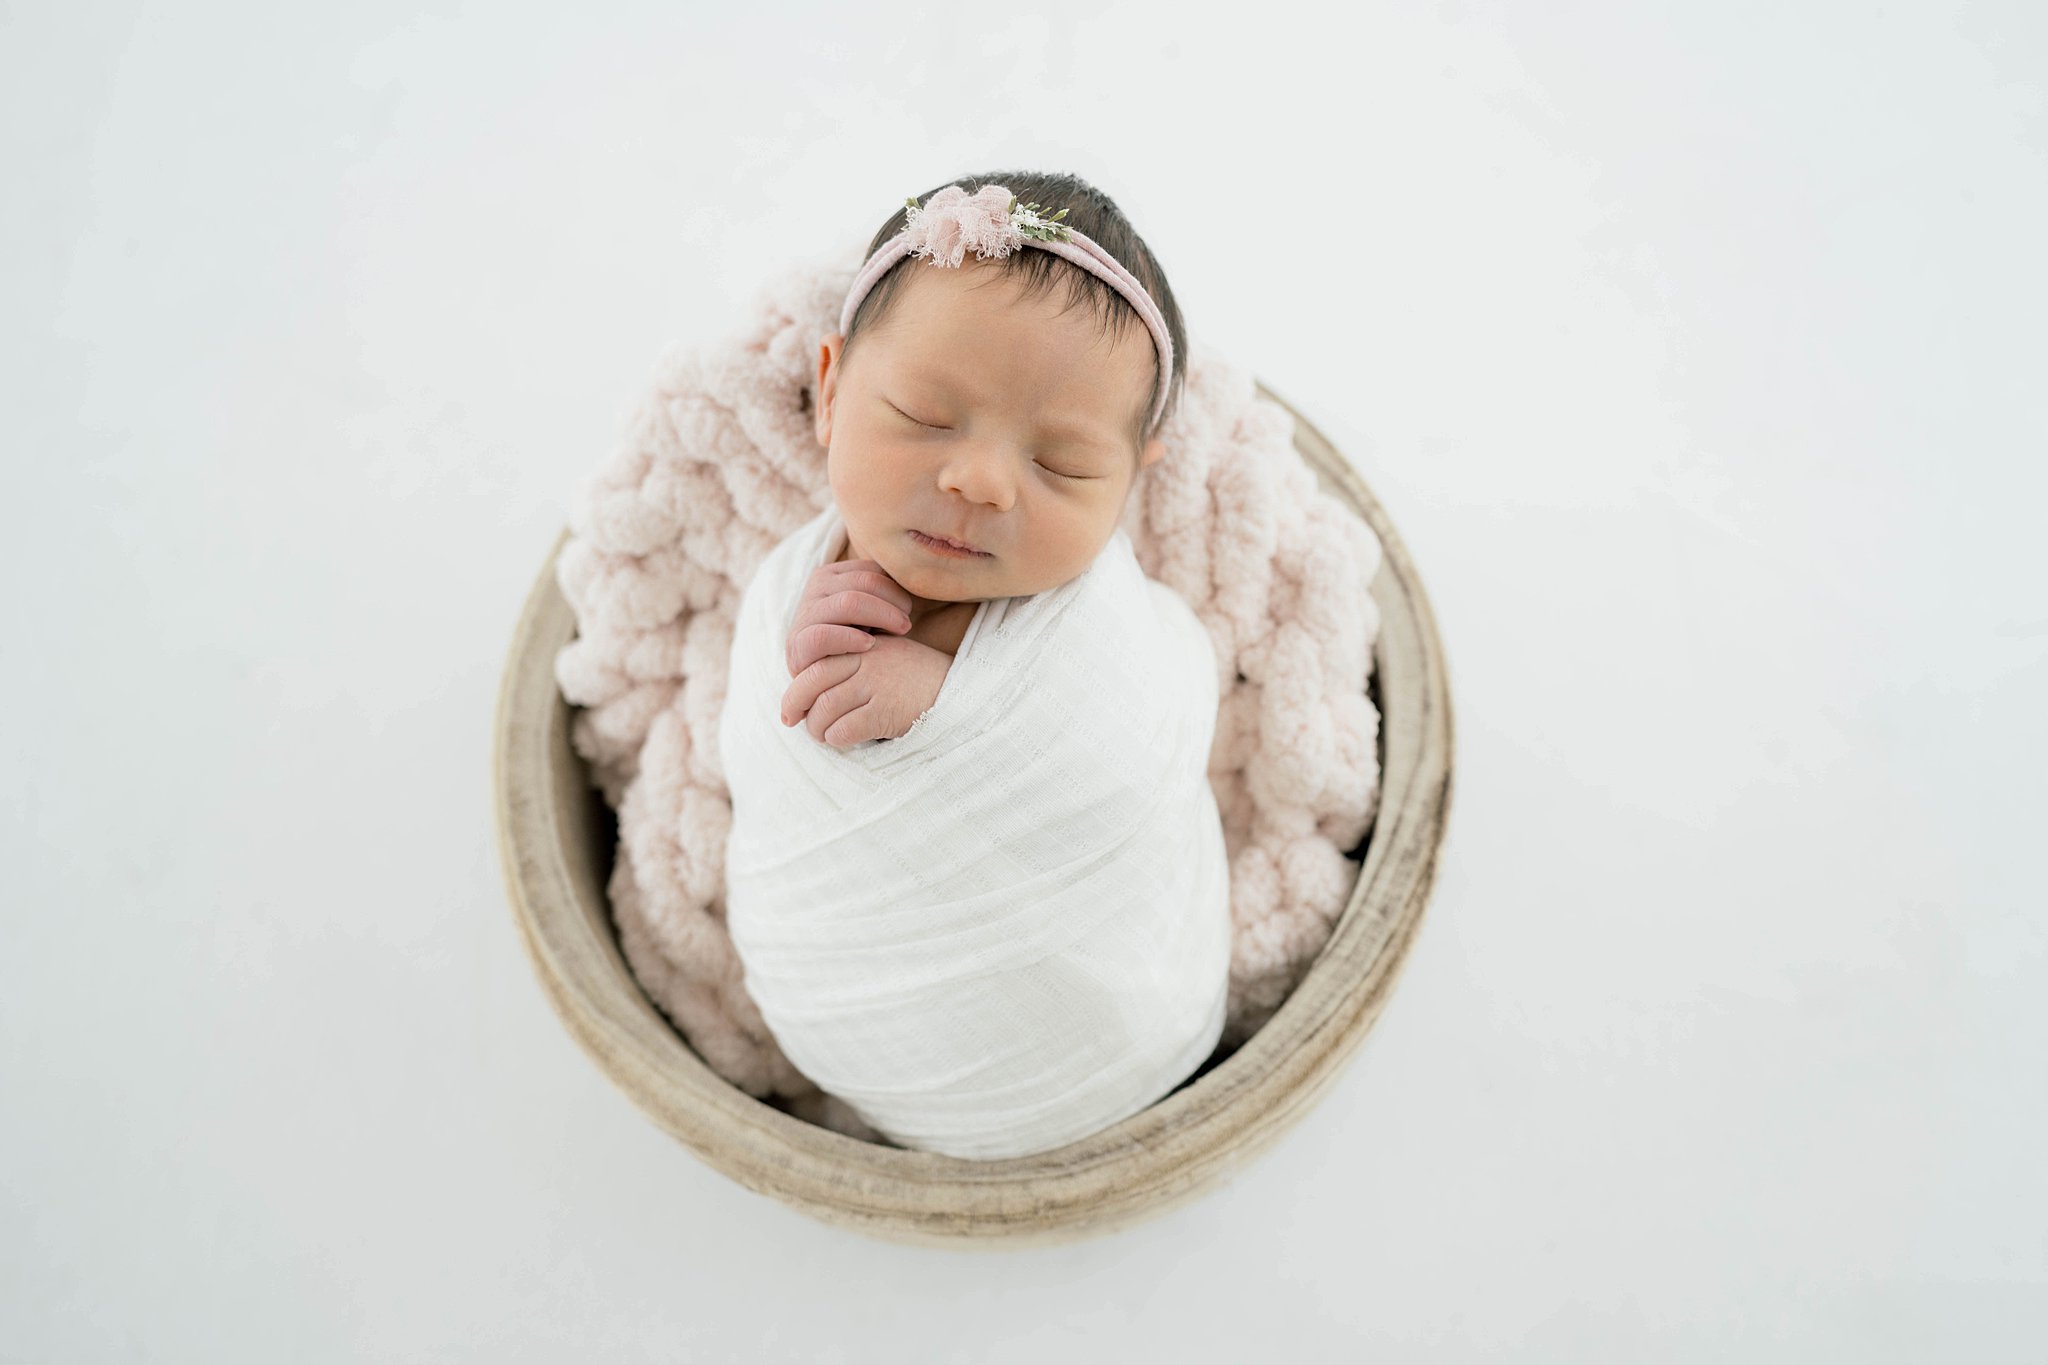 A newborn baby in a white swaddle sleeps on a pink blanket in a wooden bucket